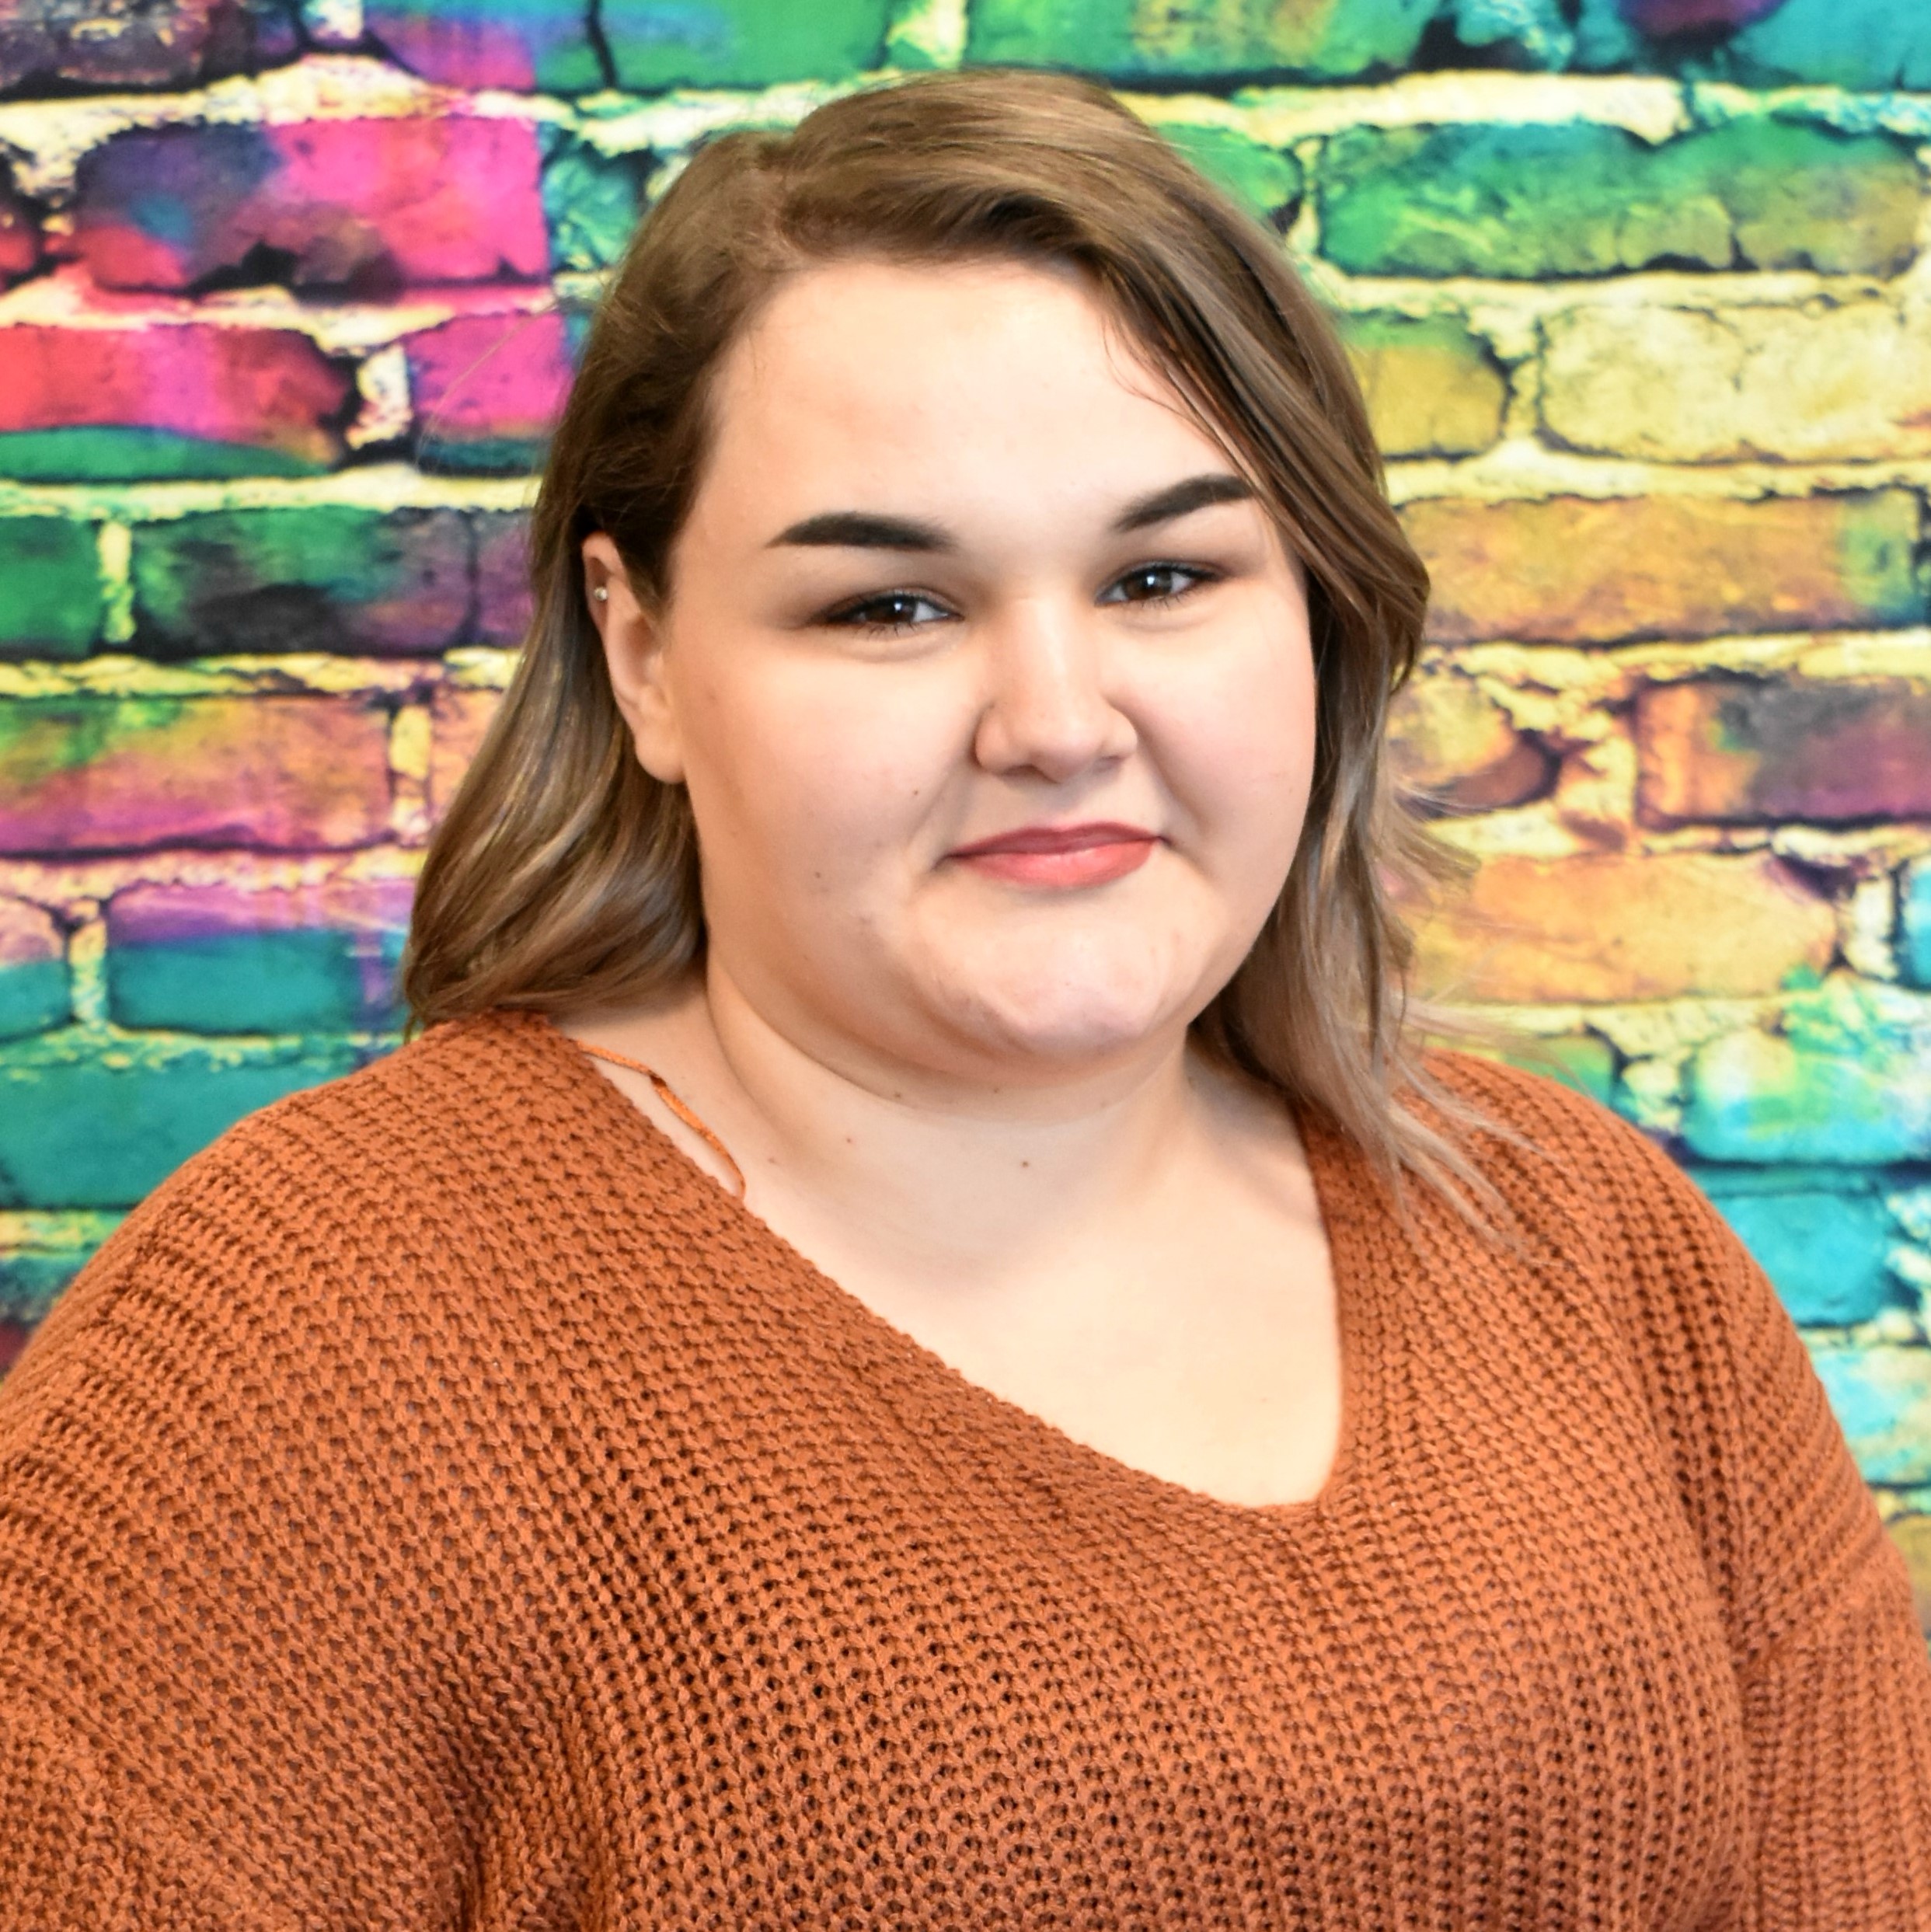 TeacherMs. Amber has been at the Diamond since August 2020.   She is an avid reader and loves working with kids. She enjoys photography and loves the “oldies” (old movies, music and décor). Amber is very creative and has lots of cool ideas to help your child have lots of fun while they learn.